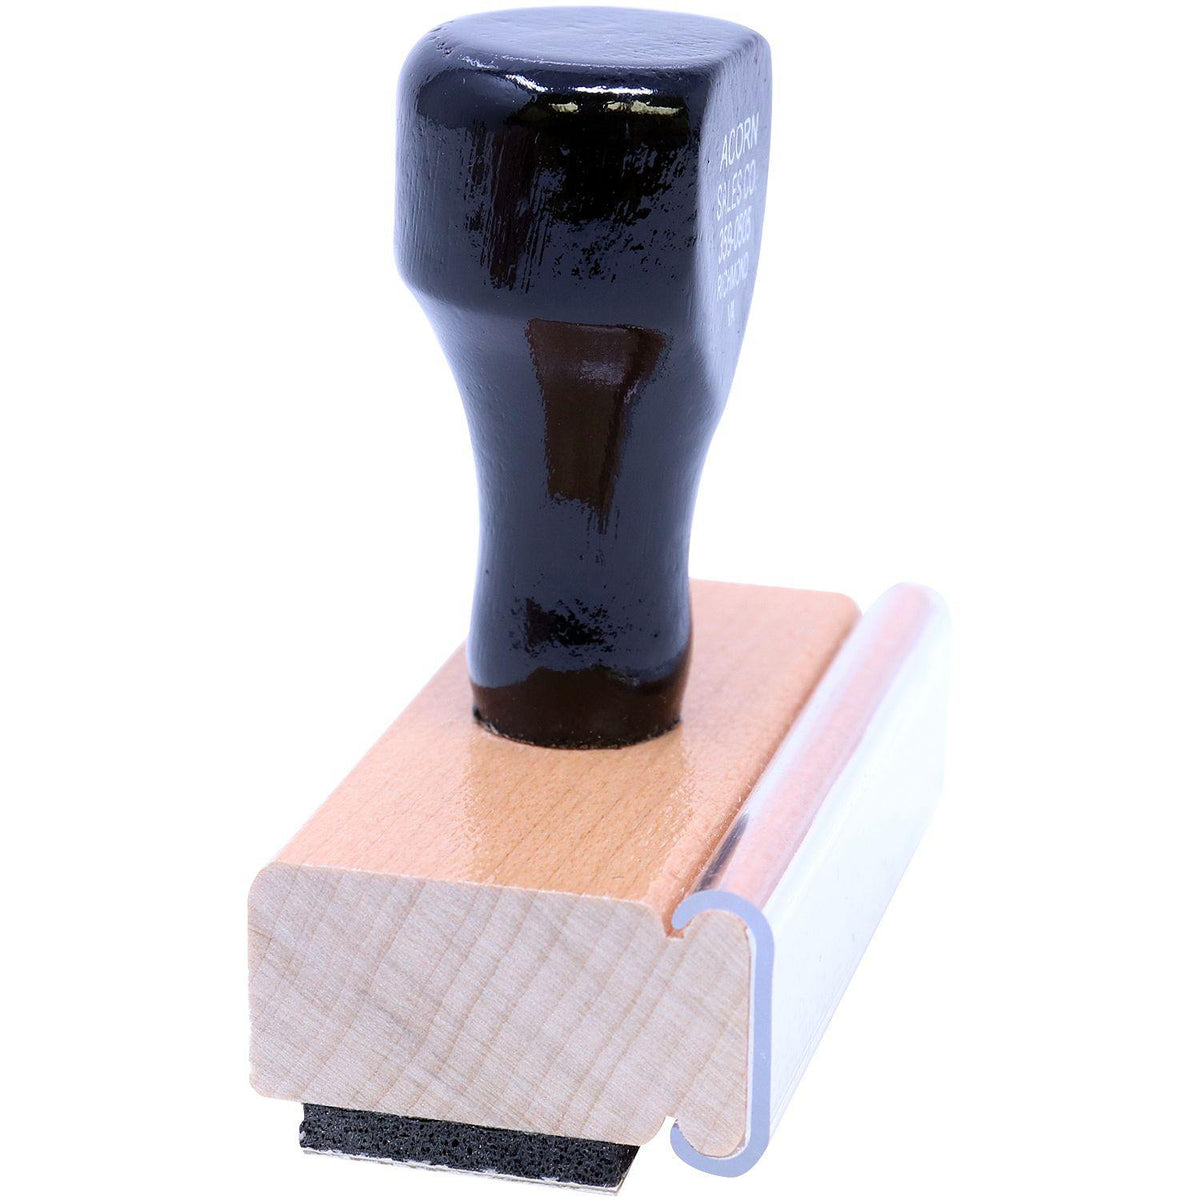 Narrow Benefits Assigned Rubber Stamp - Engineer Seal Stamps - Brand_Acorn, Impression Size_Small, Stamp Type_Regular Stamp, Type of Use_Medical Office